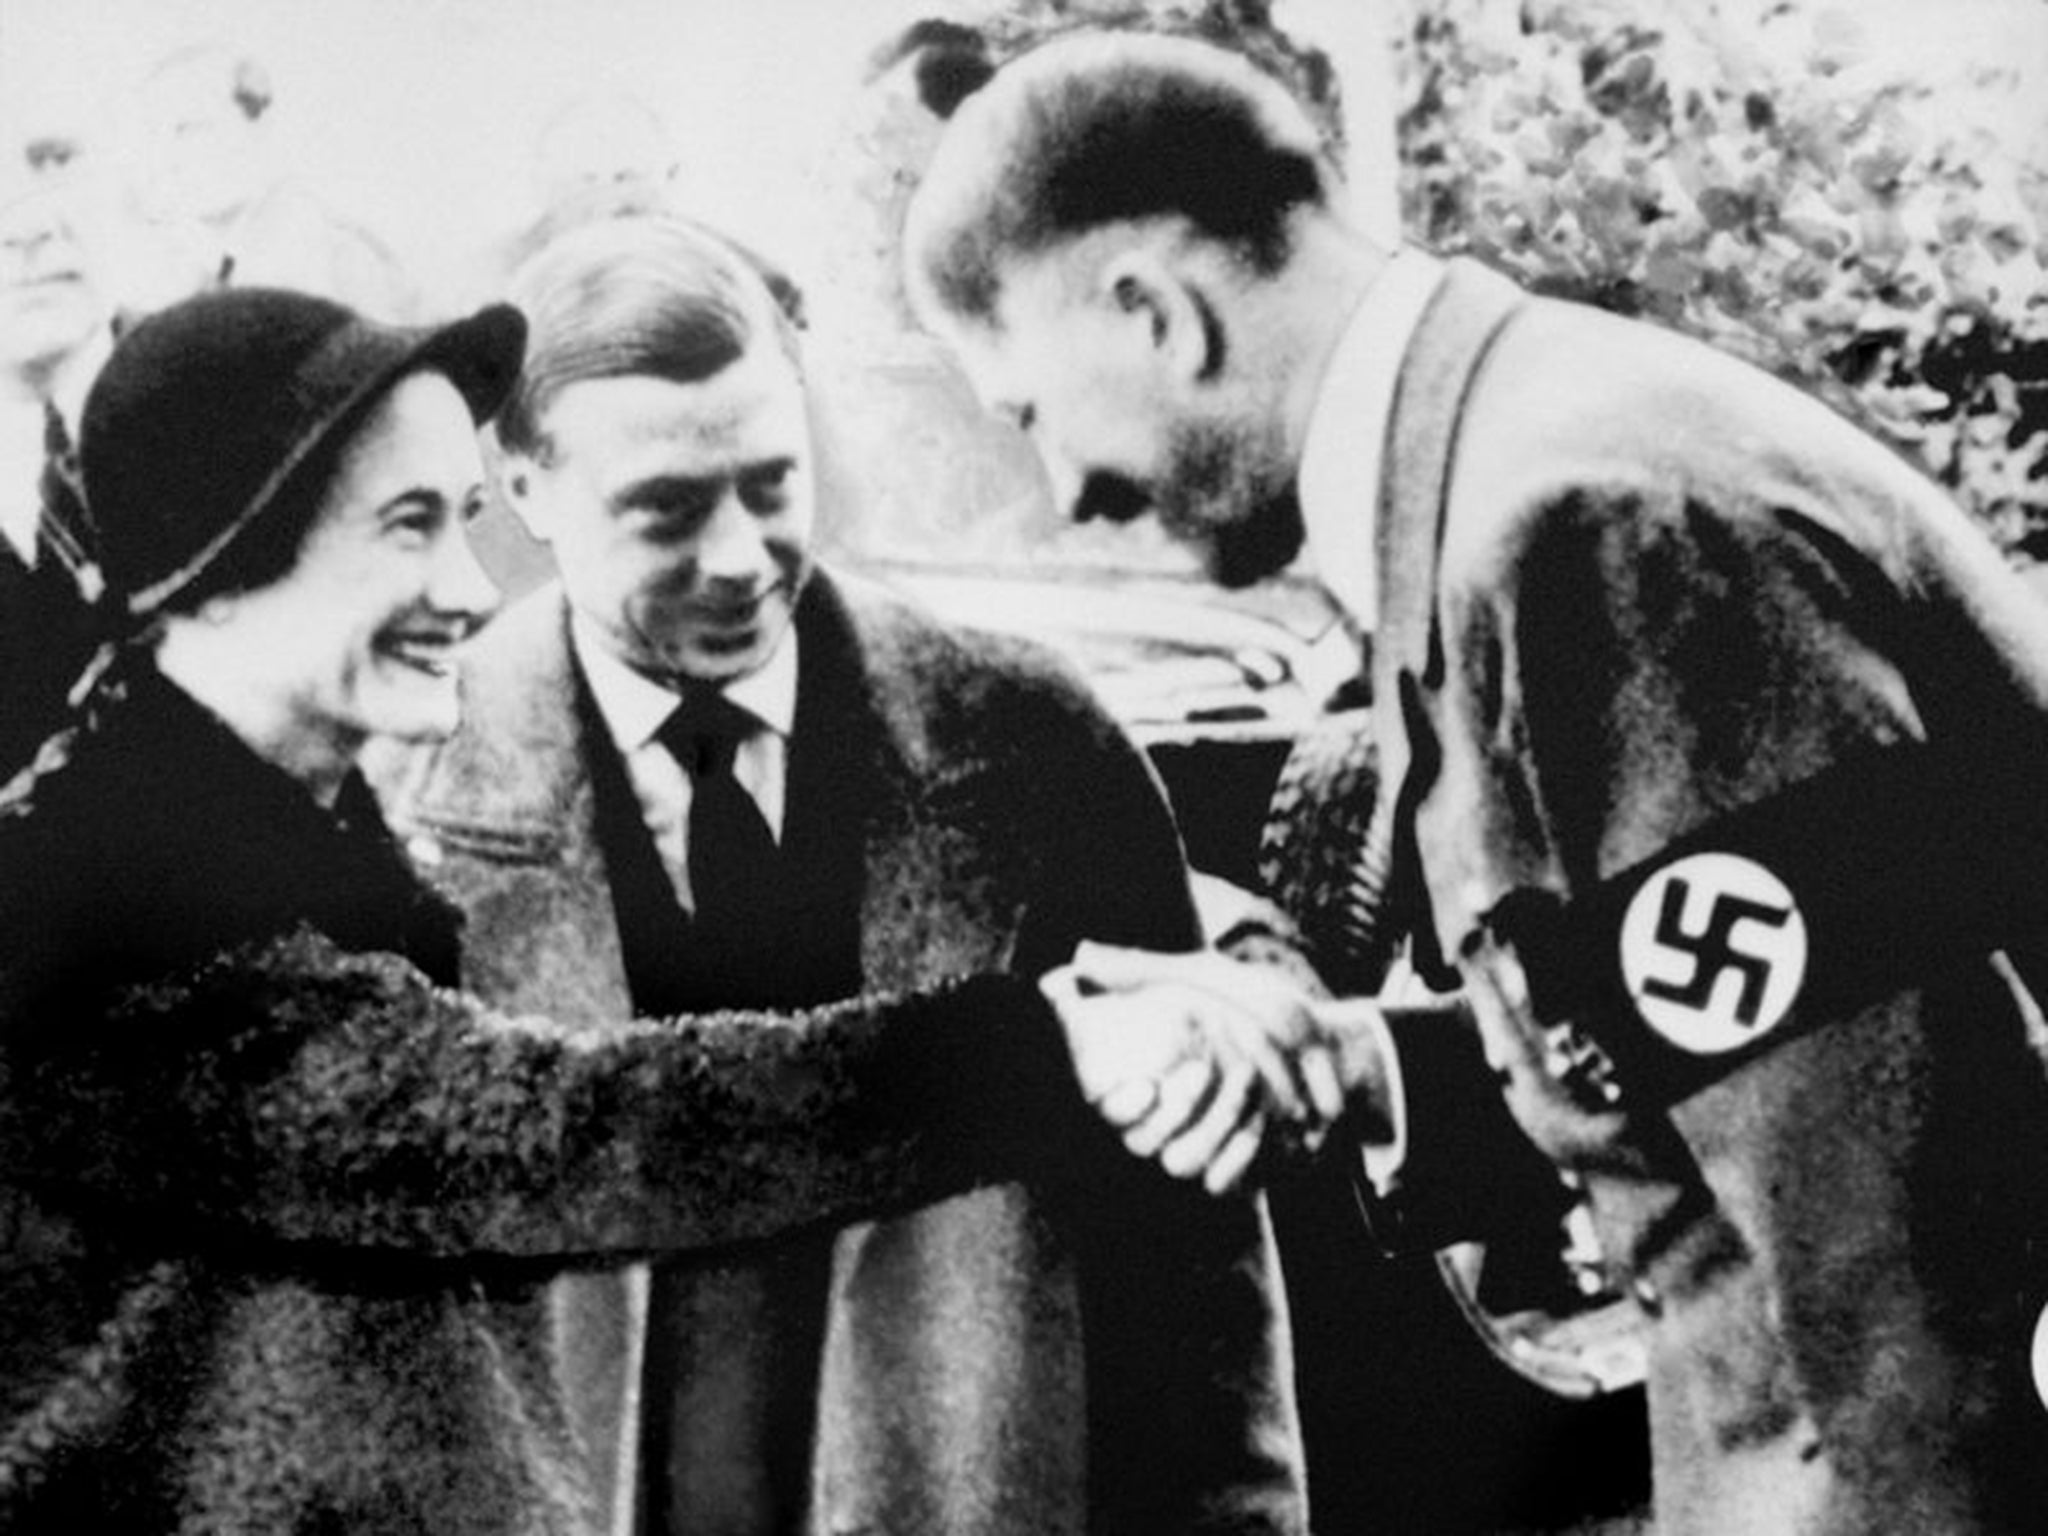 A photo from 1937 of the Duke and Duchess of Windsor meeting with German leader Adolf Hitler in Munich